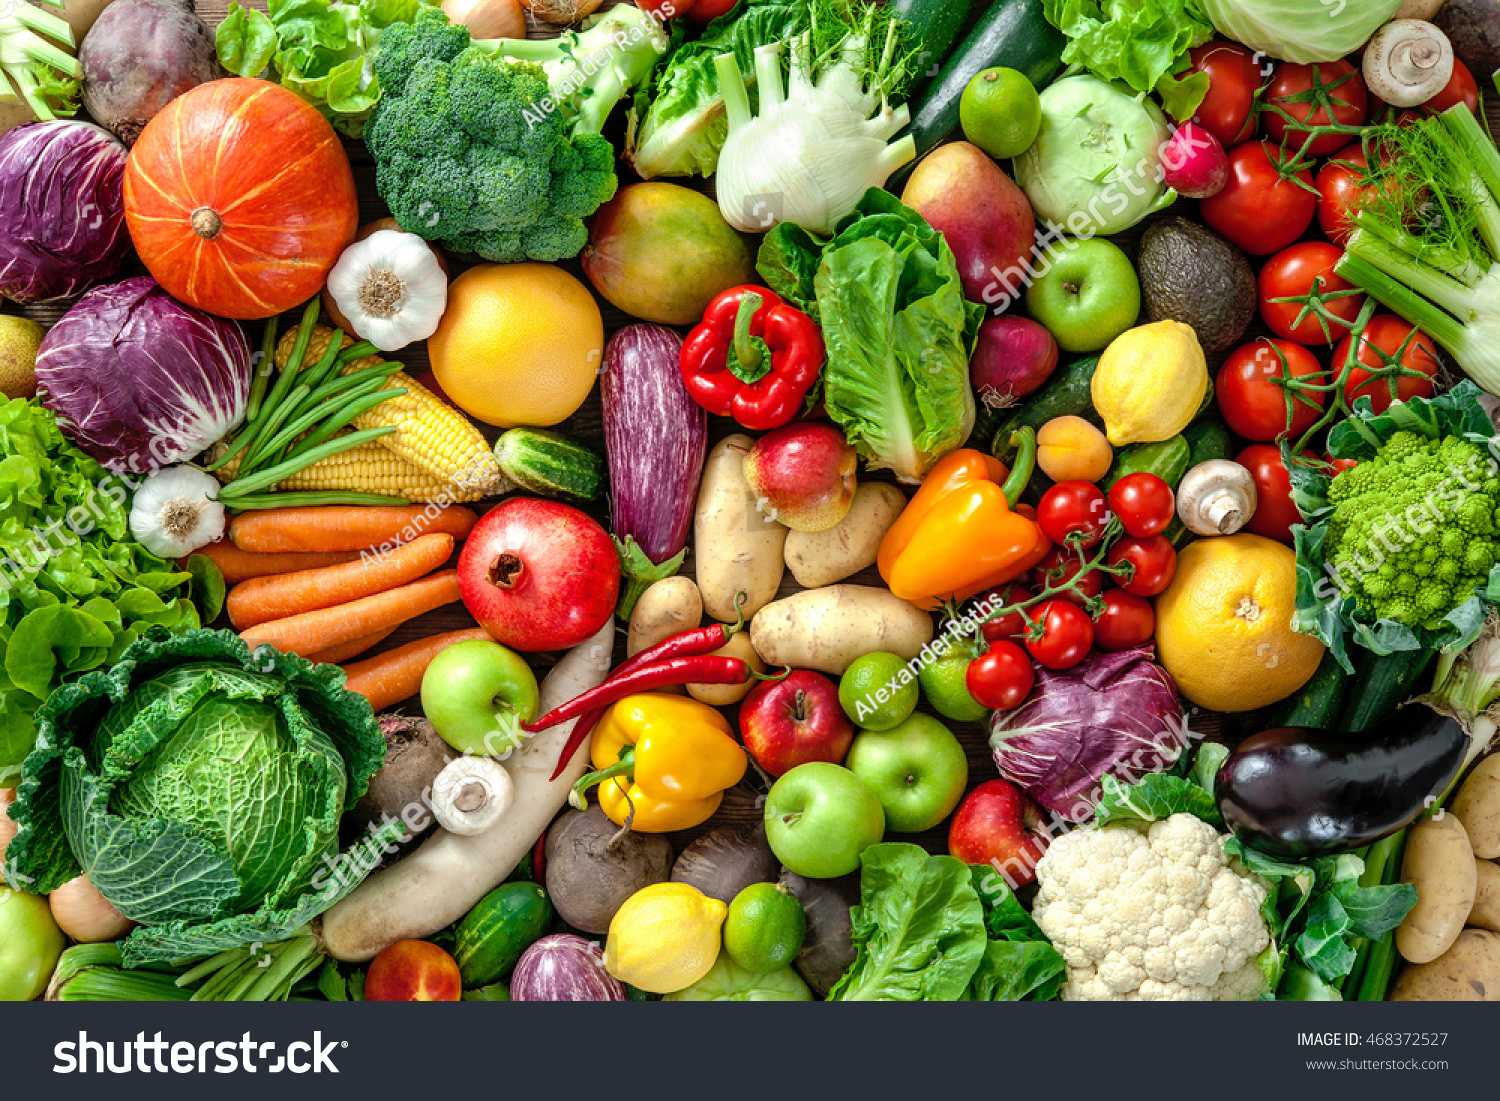 Assortment of  fresh fruits and vegetables #468372527